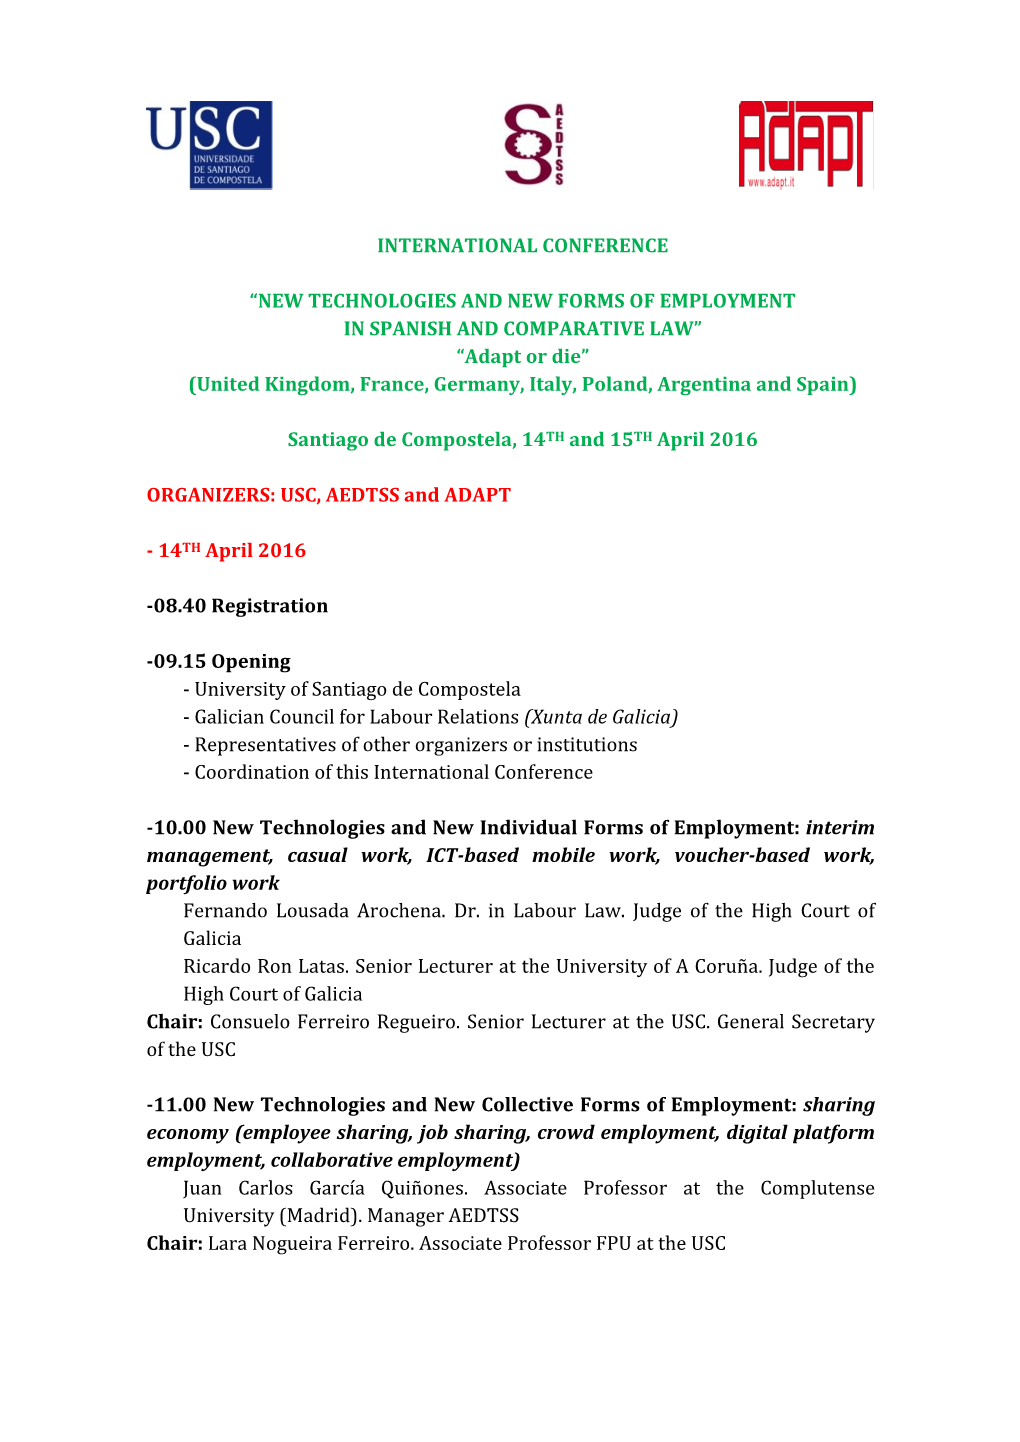 International Conference “New